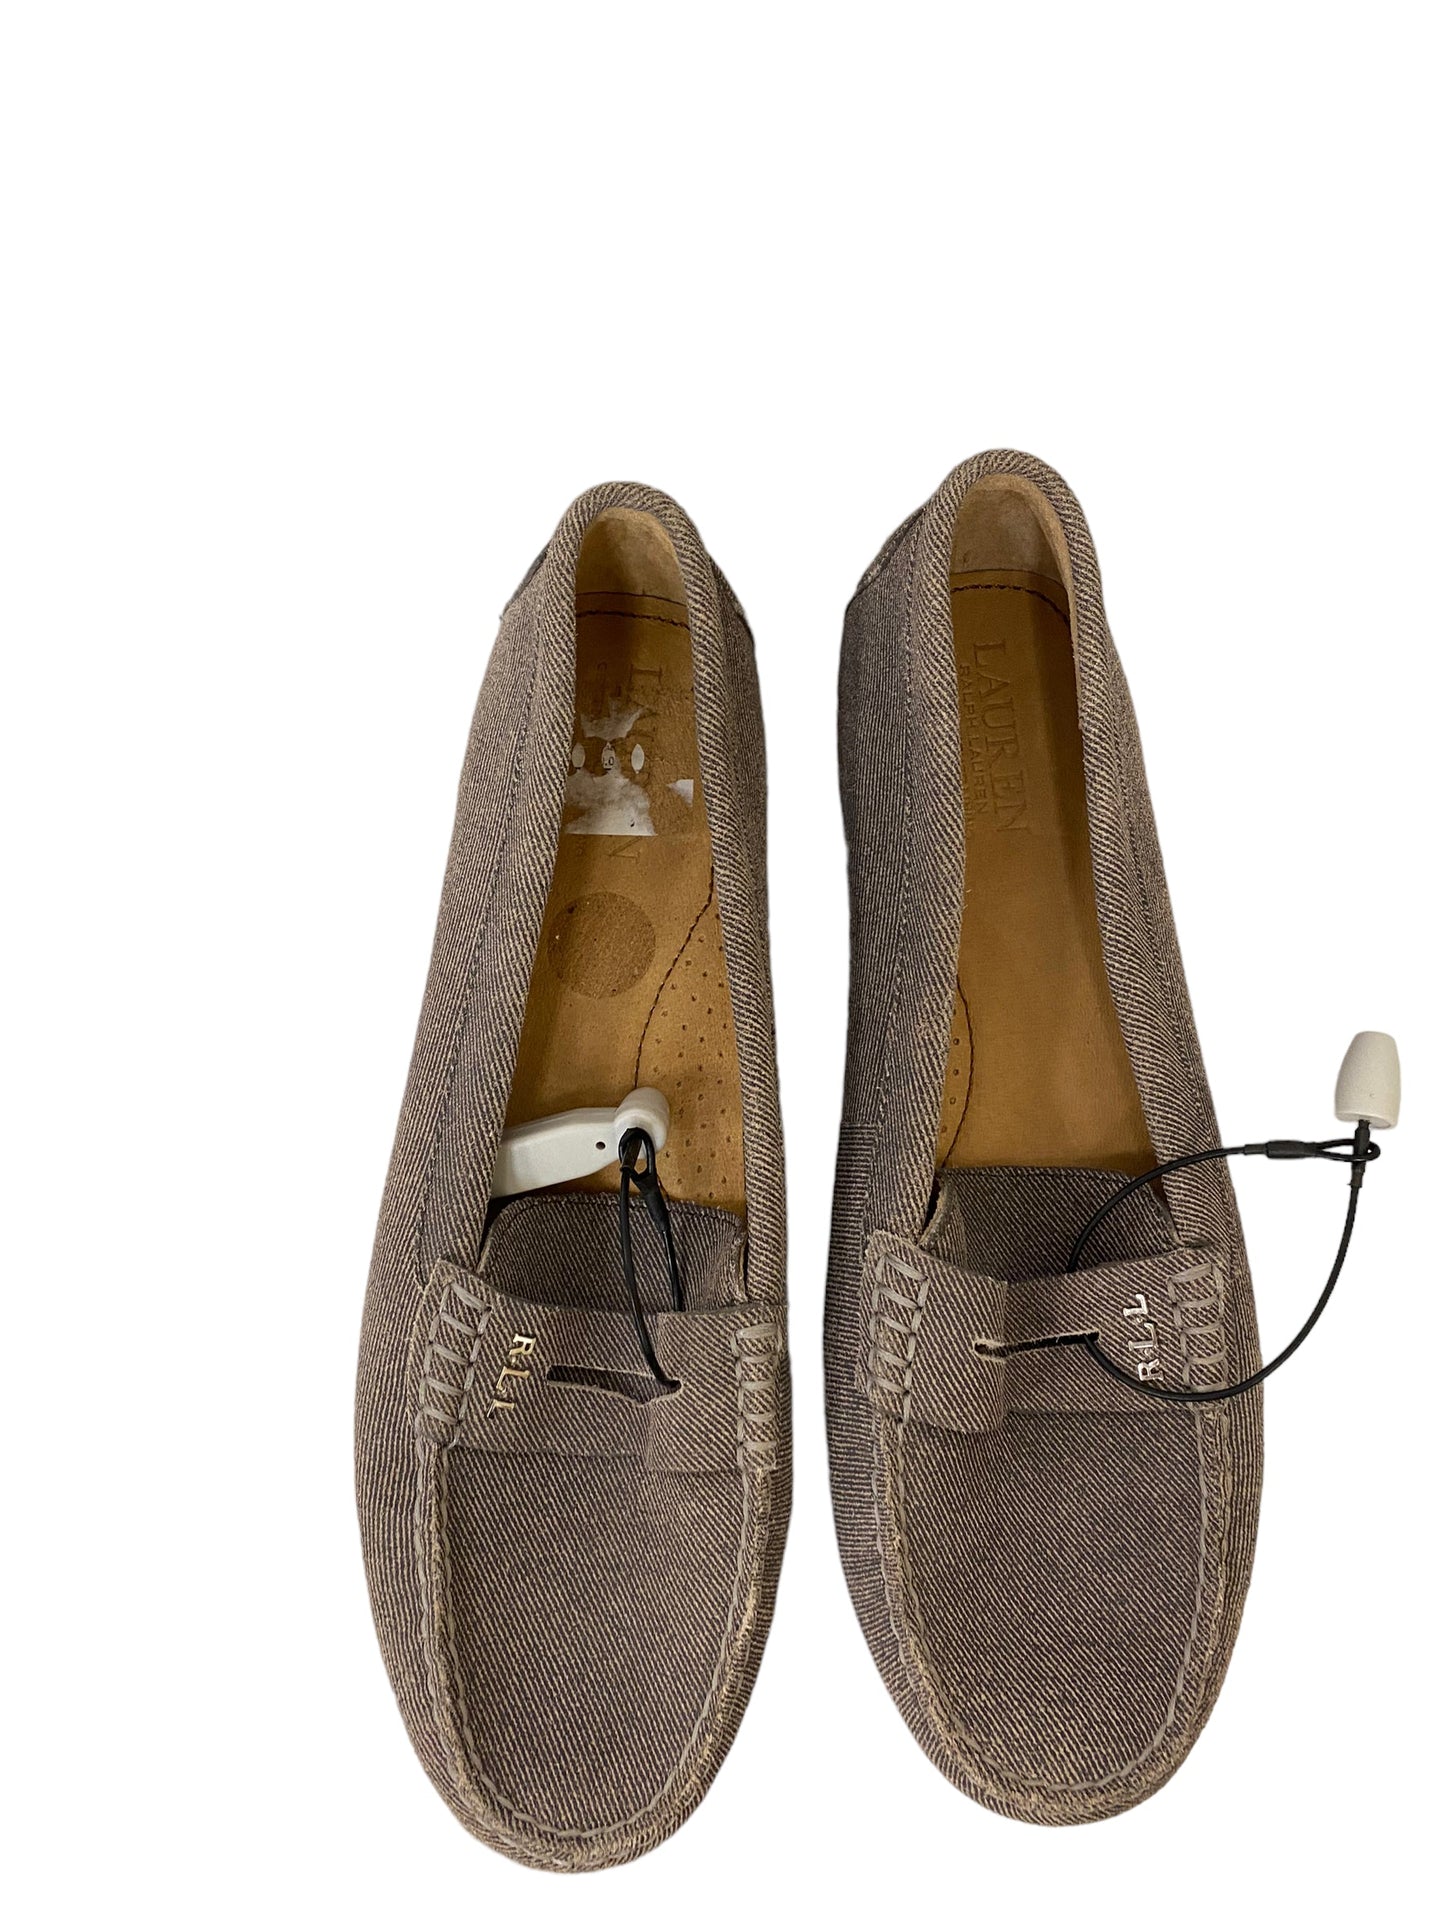 Shoes Flats Loafer Oxford By Ralph Lauren  Size: 10